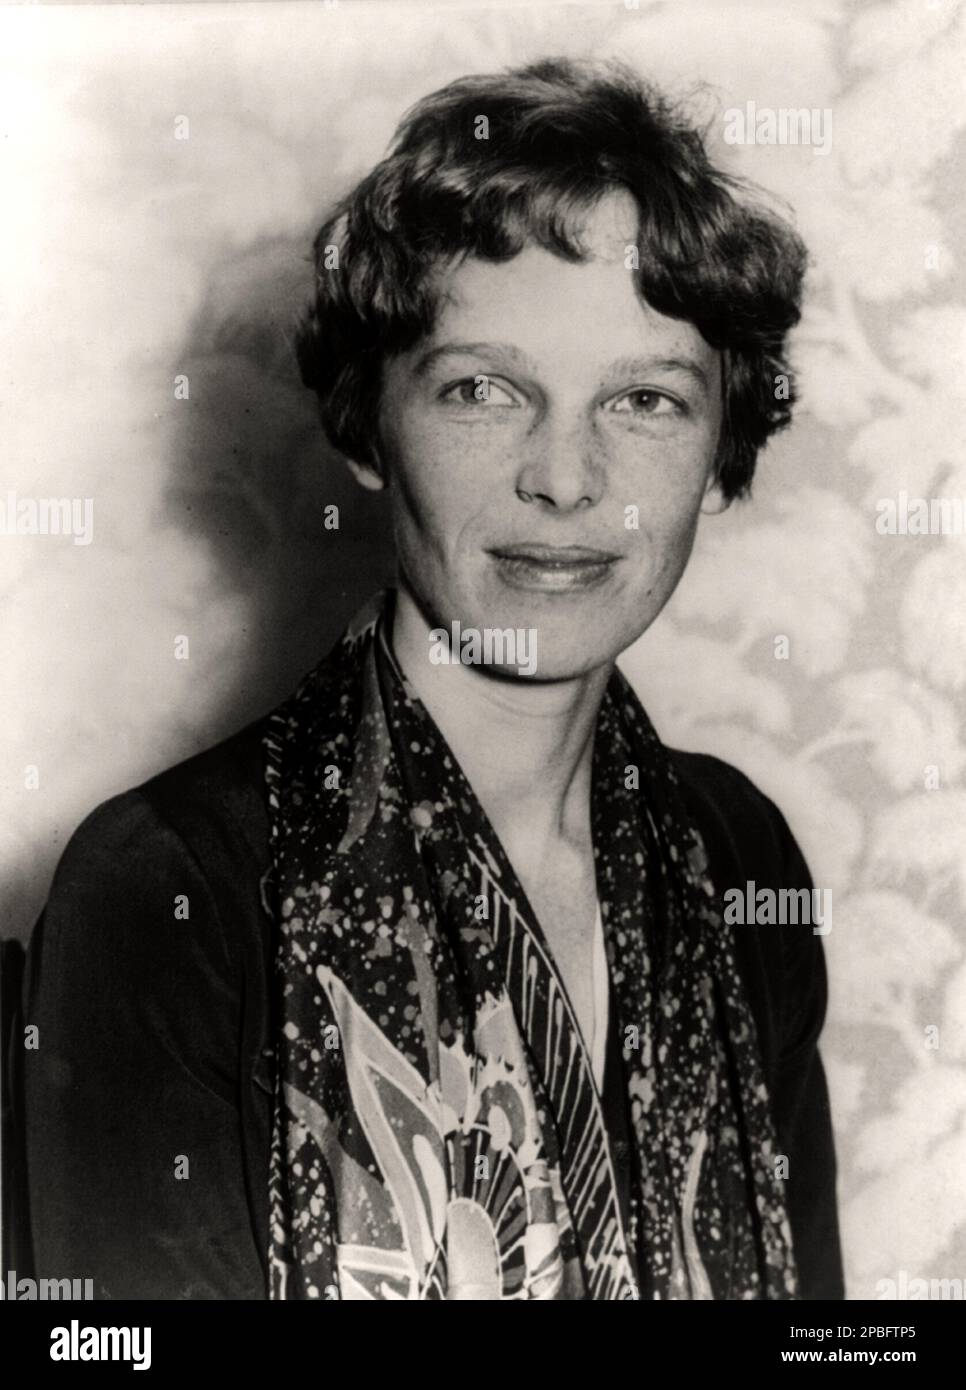 1928 , USA  :  Portraits of  most celebrated woman aviator AMELIA EARHART ( 1897 - 1937 ) . Earhart was the first woman to receive the Distinguished Flying Cross which she was awarded as the first aviatrix to fly solo across the Atlantic Ocean.  She set many other records, wrote best-selling books about her flying experiences, and was instrumental in the formation of The Ninety-Nines, an organization for female pilots.  During an attempt to make a circumnavigational flight of the globe in 1937, Earhart disappeared over the central Pacific Ocean near Howland Island. Fascination with her life, c Stock Photo